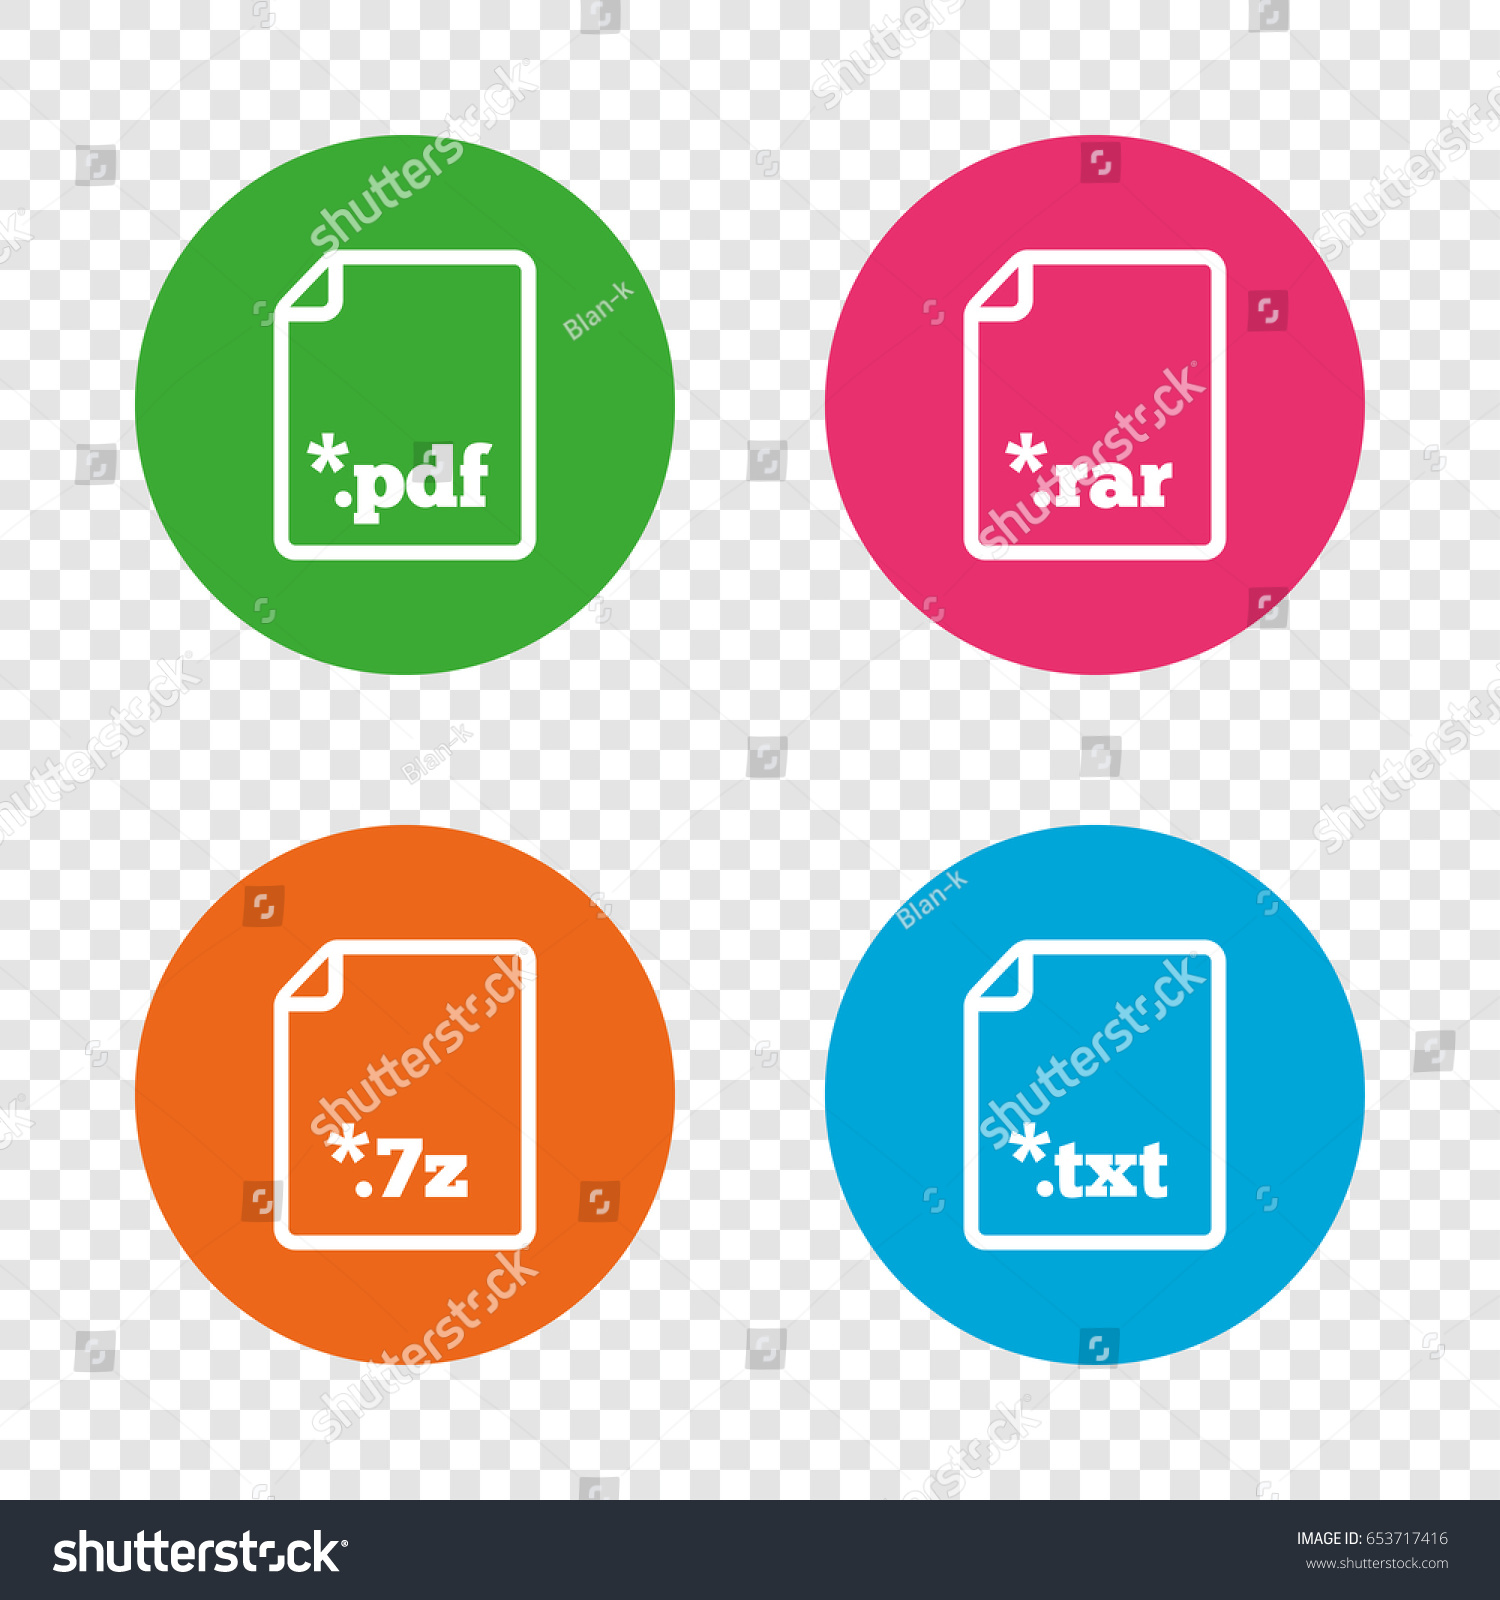 Download Pdf Icon Png Icon #2080 - Free Icons and PNG Backgrounds